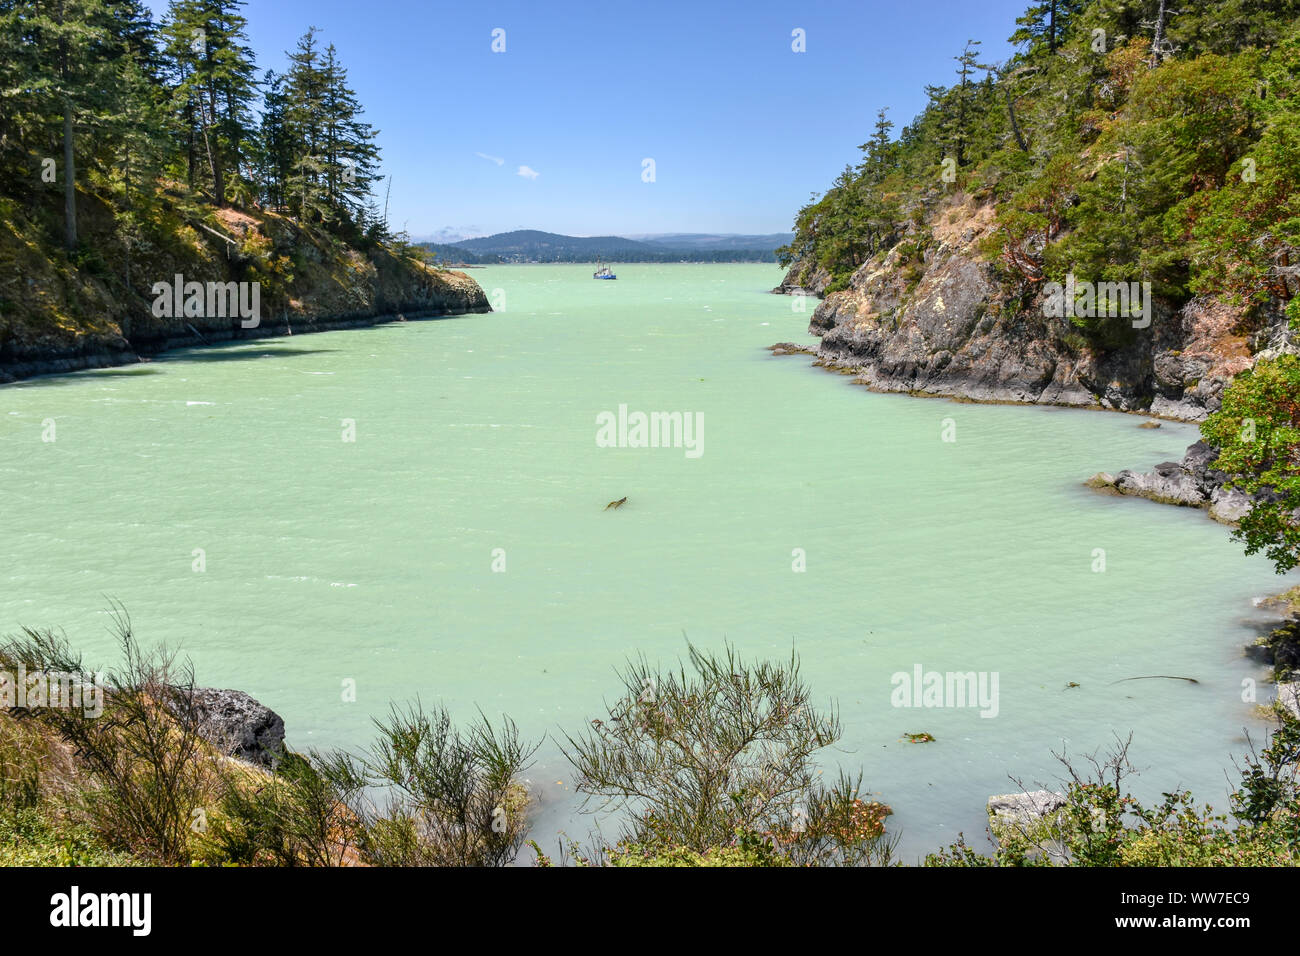 A result of climate change, an algal bloom colours the waters of Sooke Harbour, East Sooke, British Columbia, Canada Stock Photo